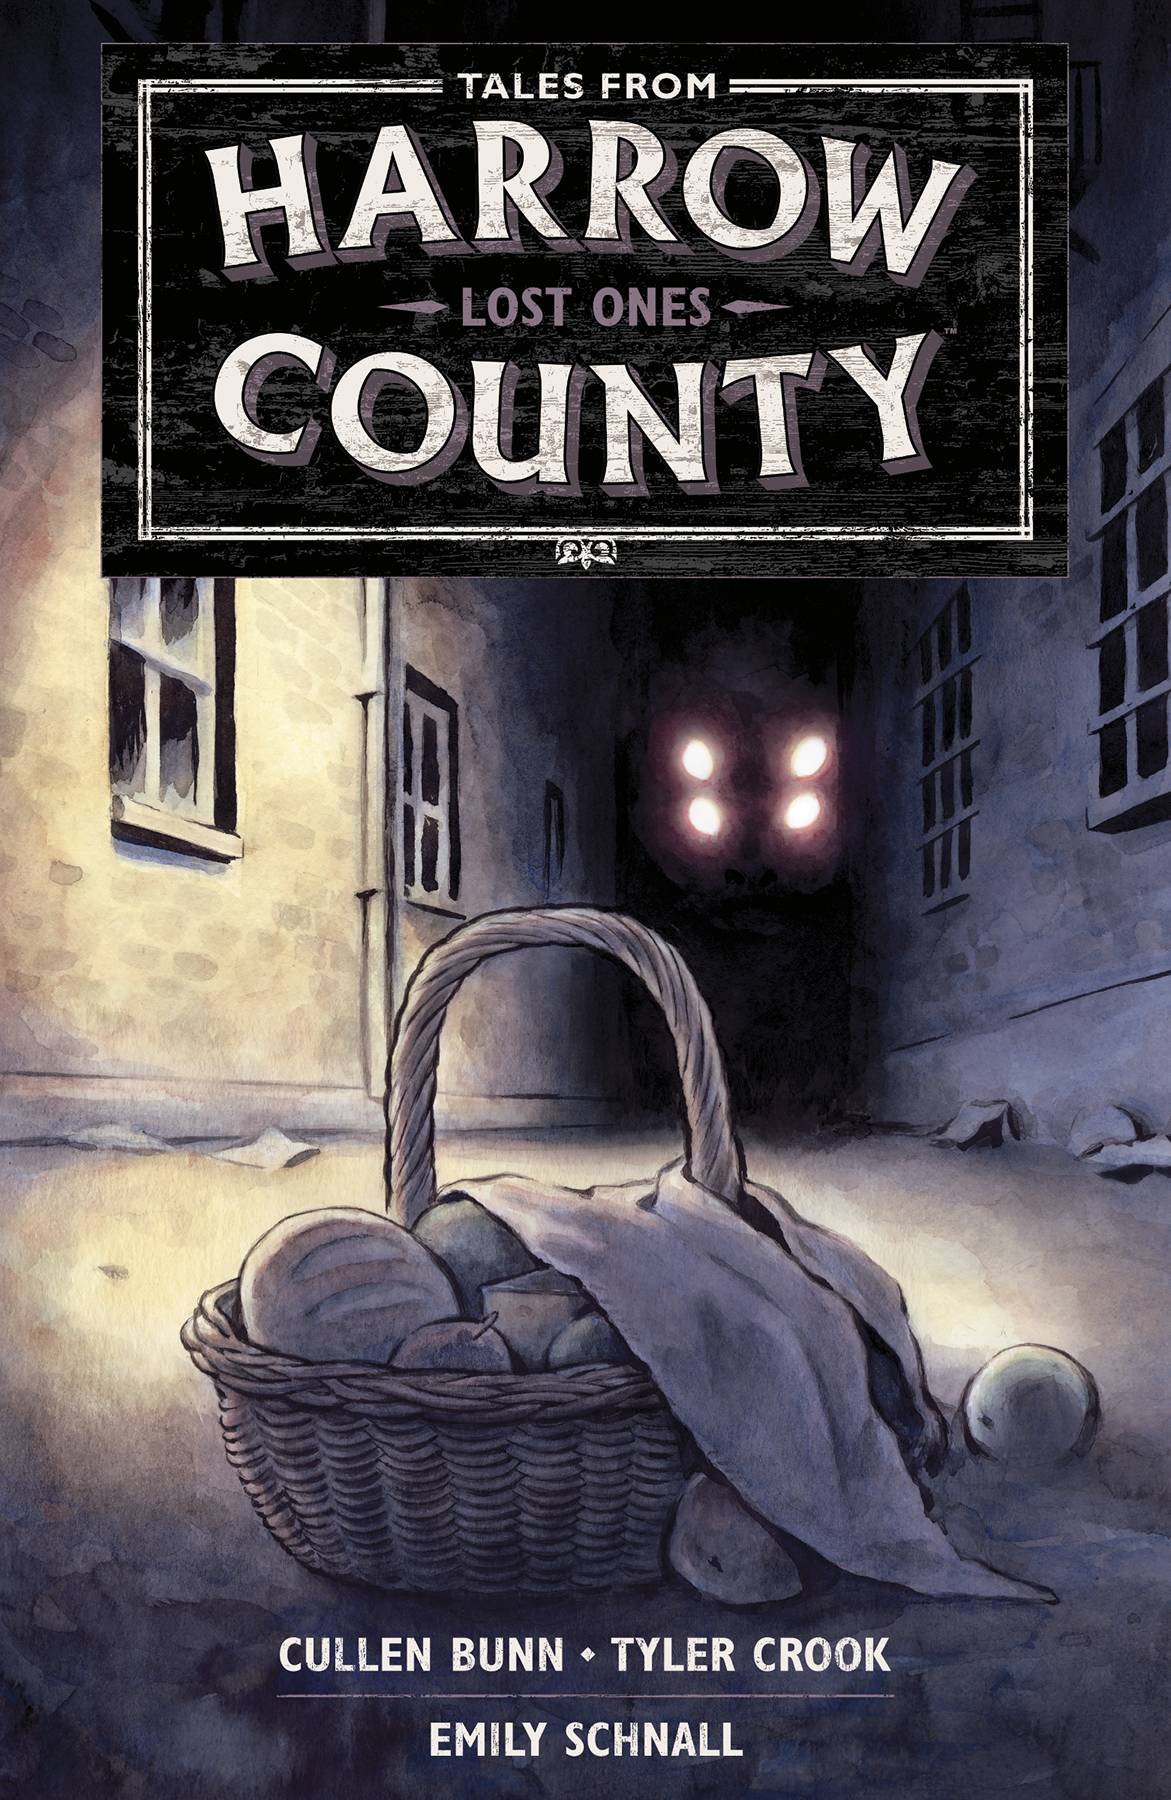 TALES FROM HARROW COUNTY TP VOL 03 LOST ONES